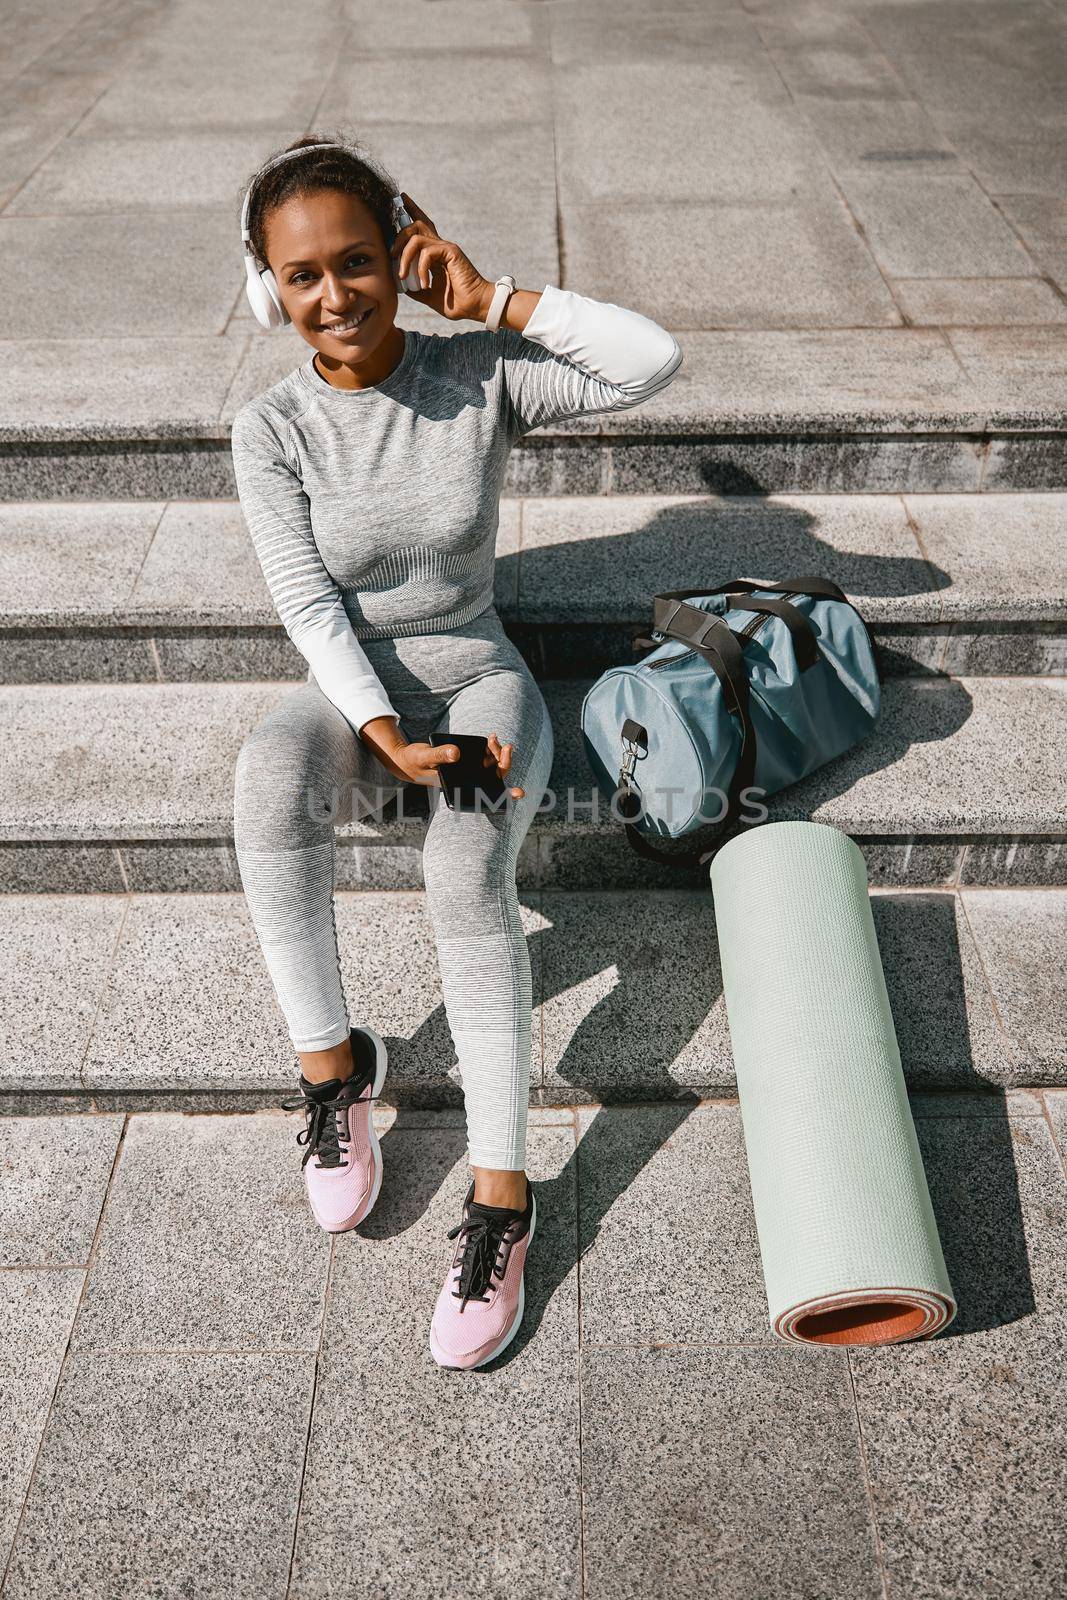 Sportswoman with sportive bag and yoga mat smiling at camera, resting outdoors